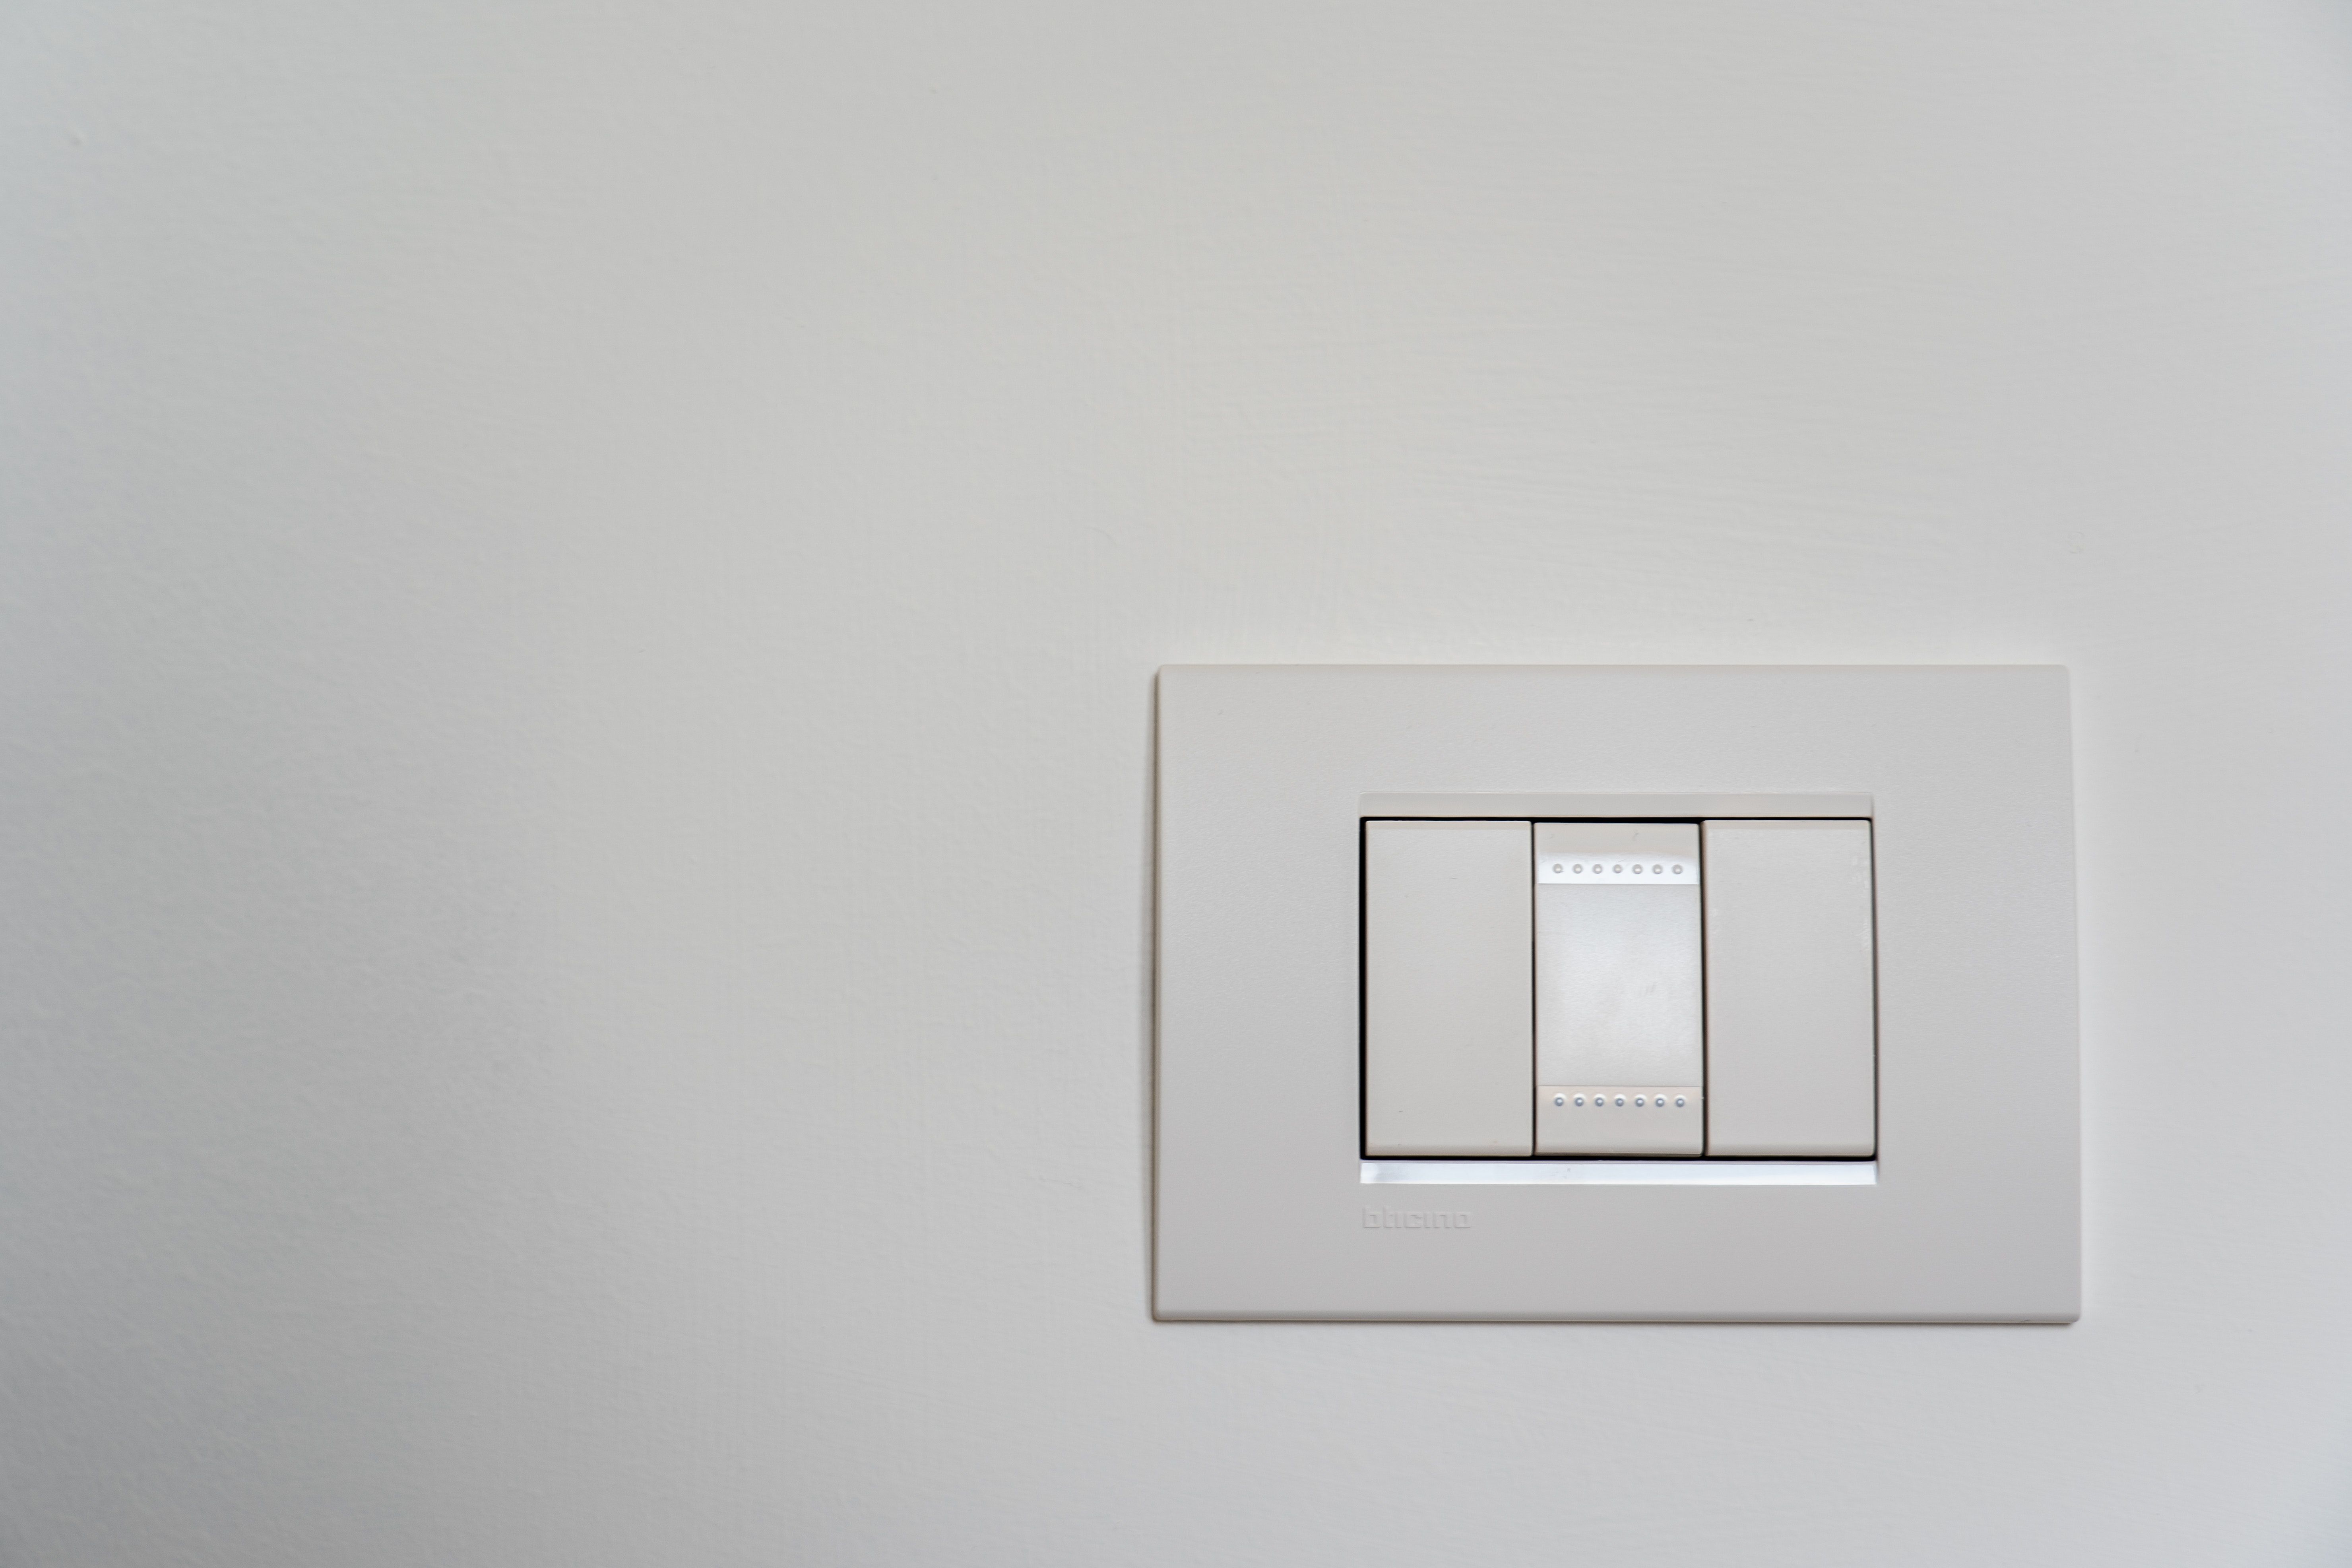 Photo of a light switch on a wall